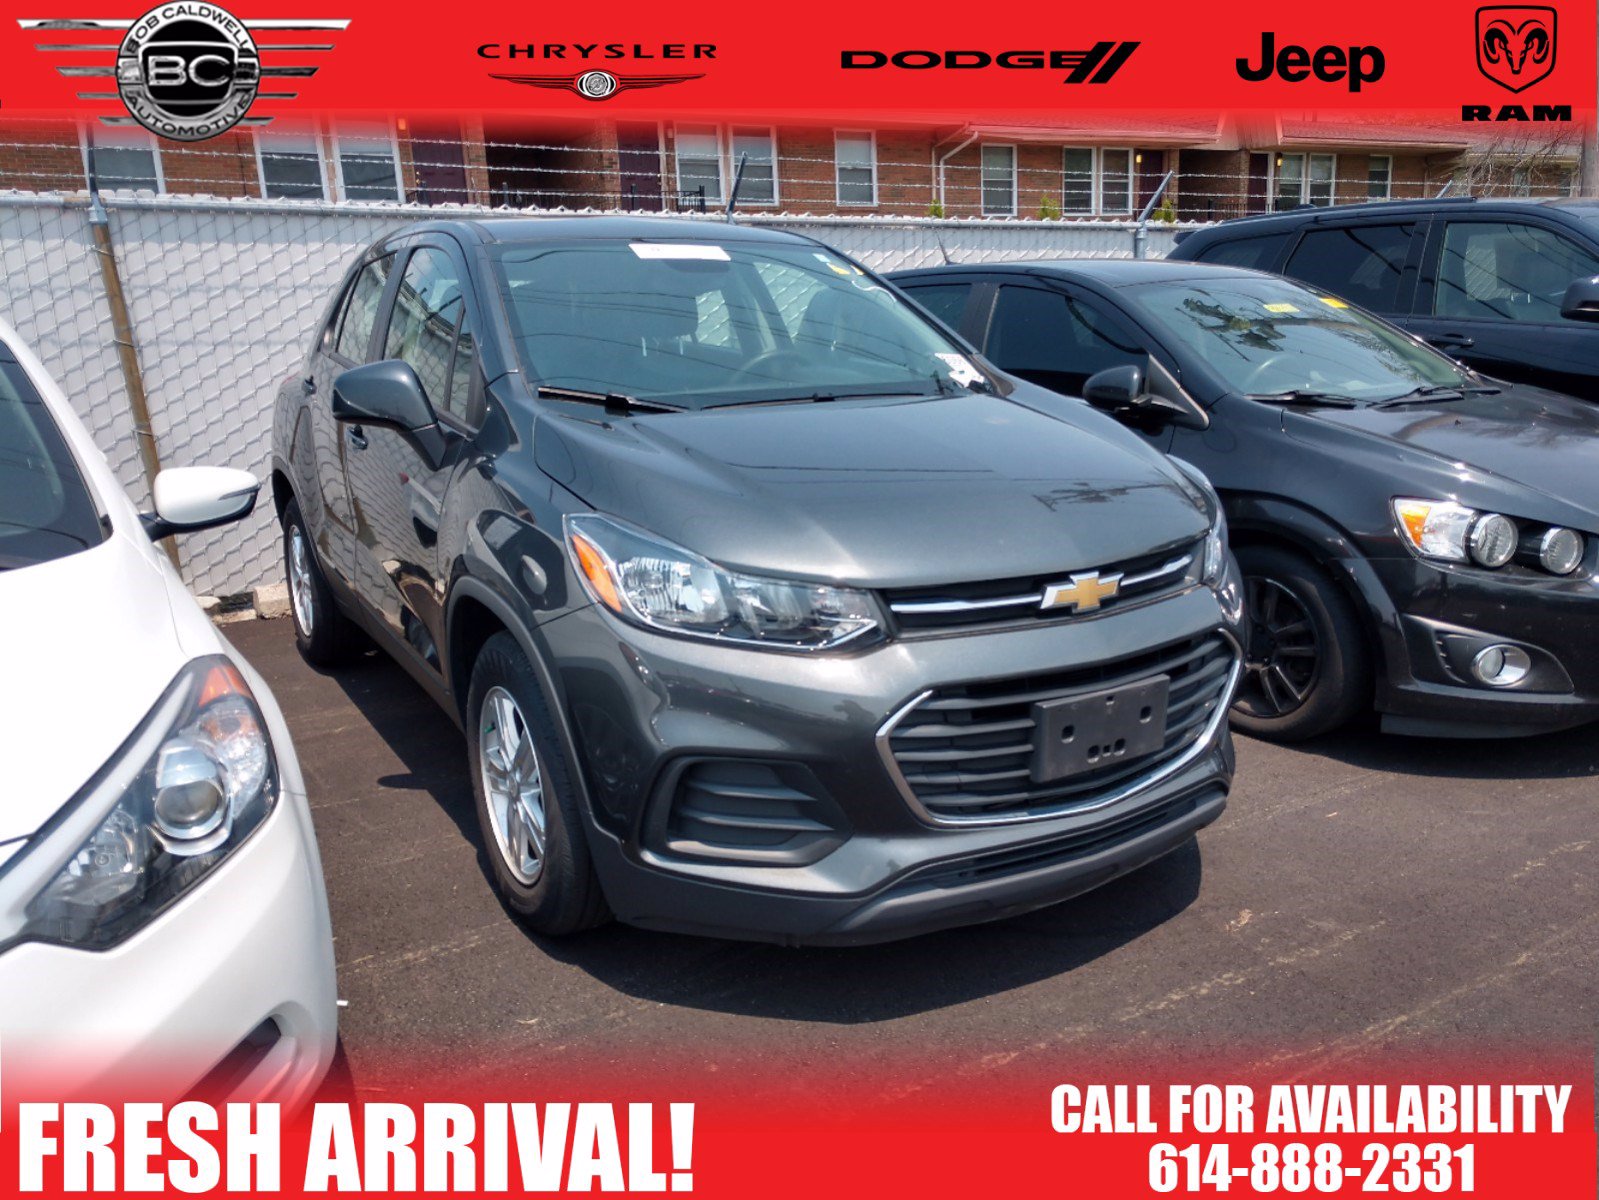 2019 Chevrolet TRAX VIN 3GNCJLSB3KL370334 from the USA